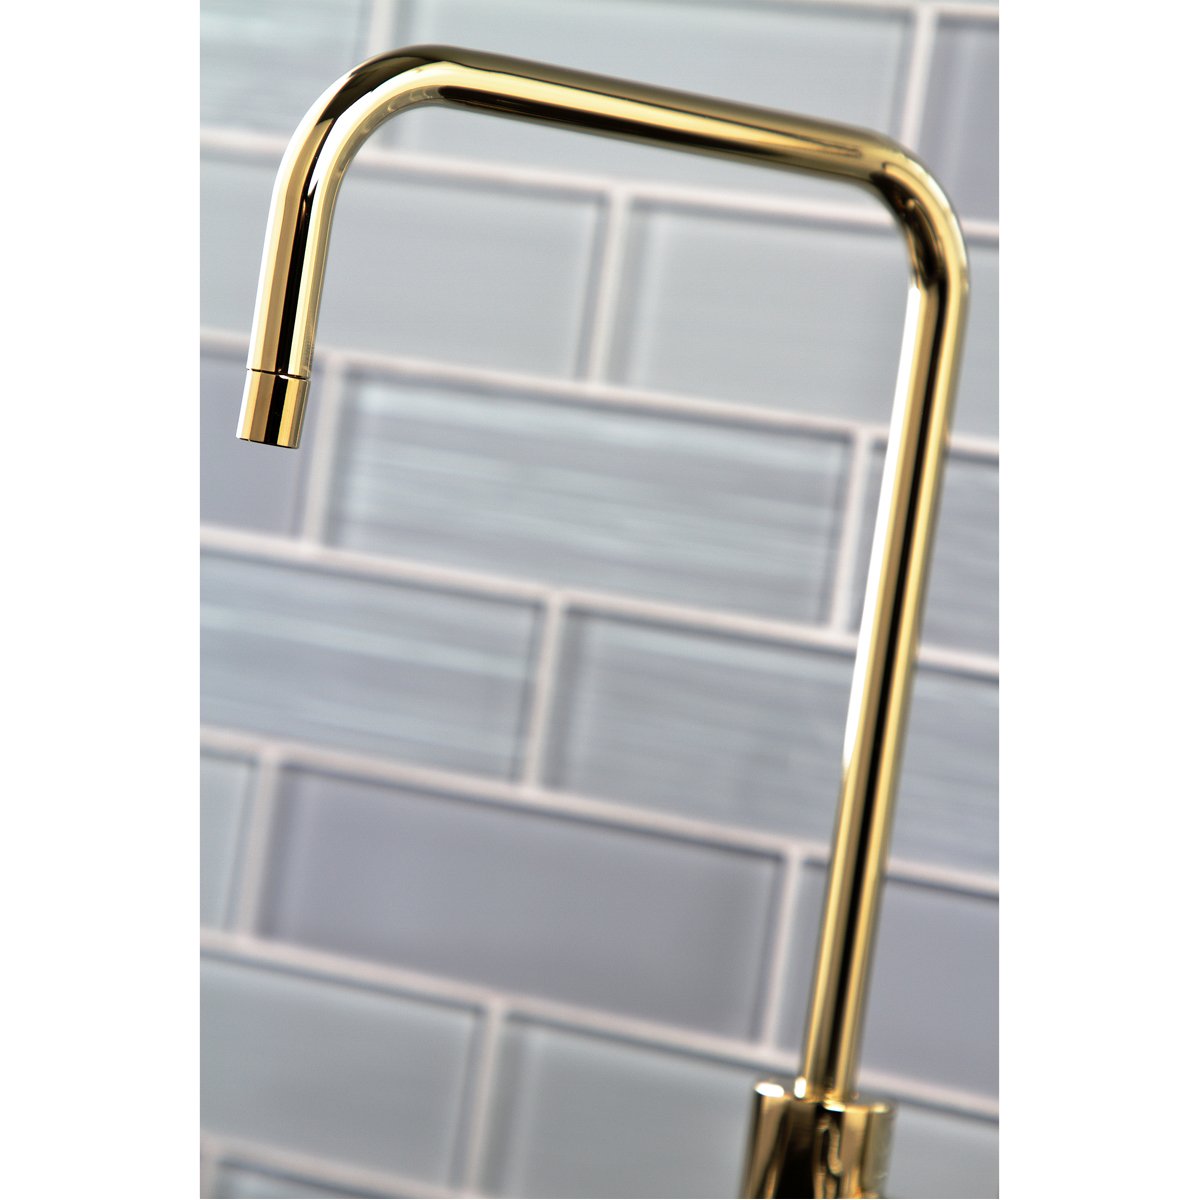 Kingston Brass Nustudio Single-Handle Cold Water Filtration Faucet